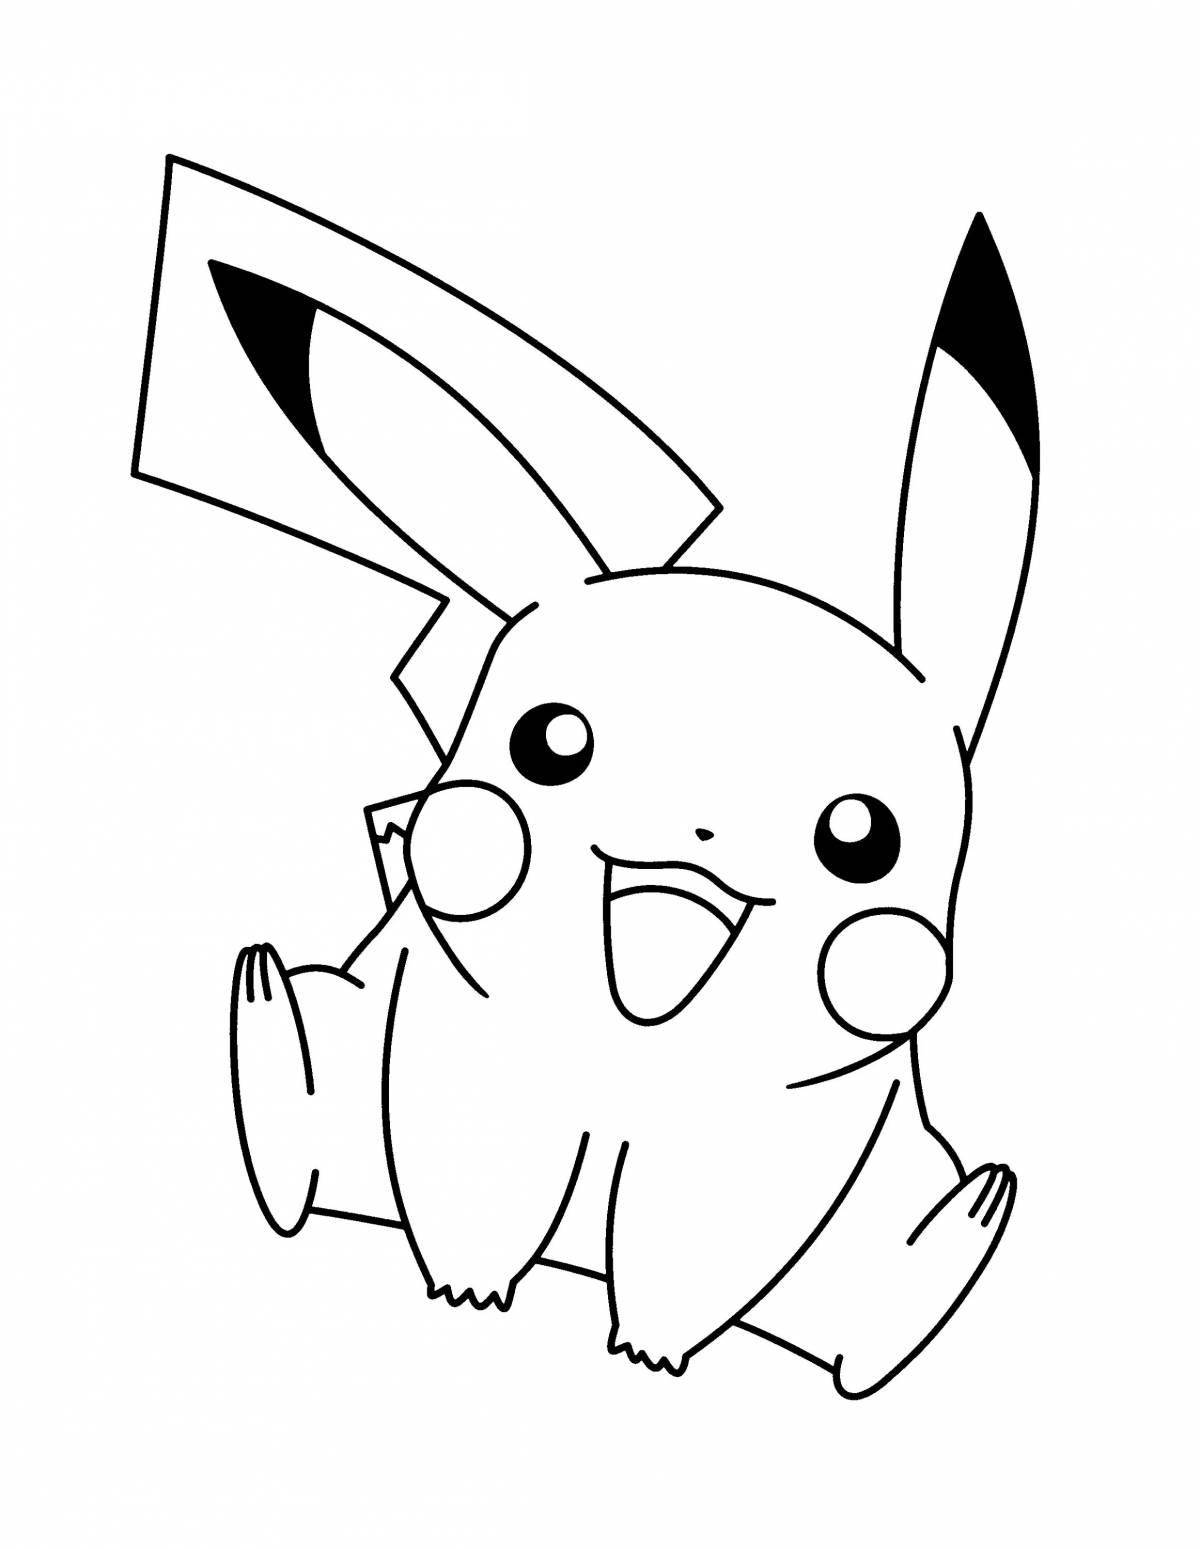 Adorable pikachu seal coloring page